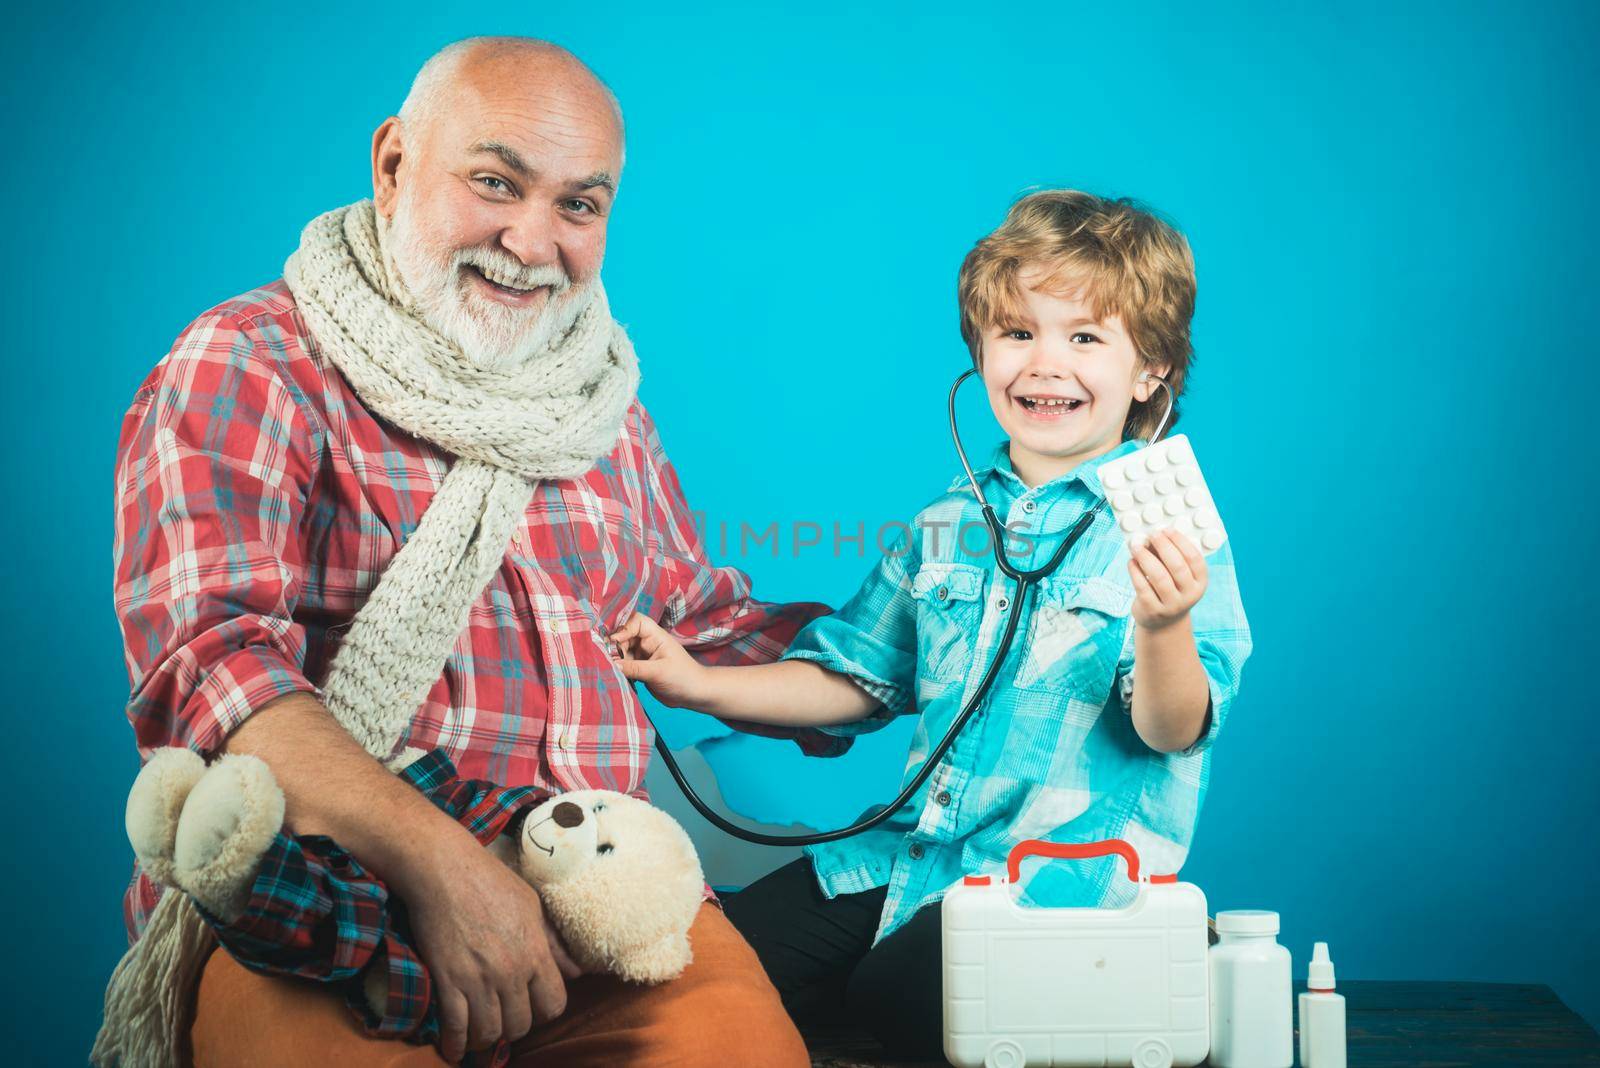 Little doctor grinning while showing tablet to old grandfather. Old man taking a pill. Little doctor. Grandfather and kid playing clinic